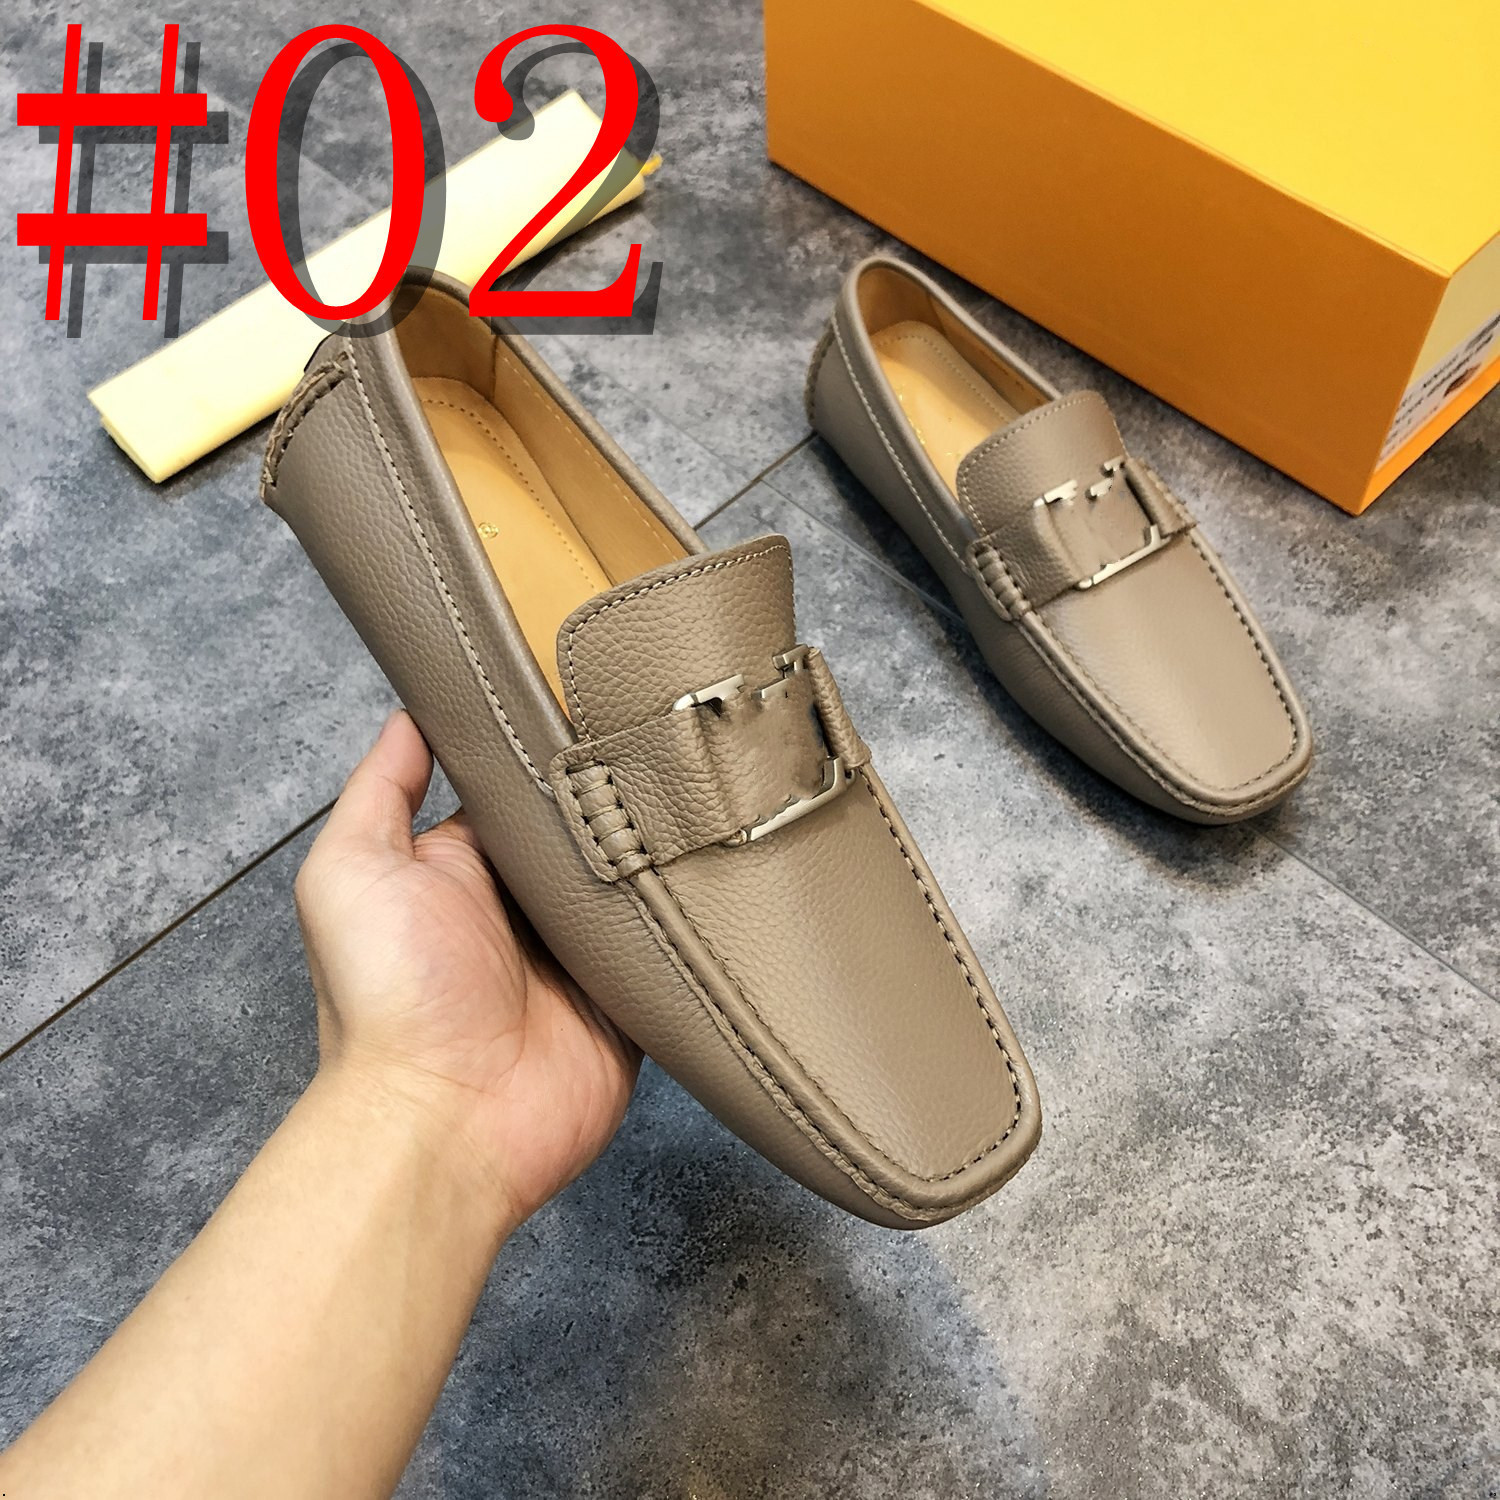 43Model Spring New Suede Casual Designer Men Loafers Shoes Fashion Slip on Loafers Male Leather Comfortable Flat Shoes Moccasins Classic Driving Shoes